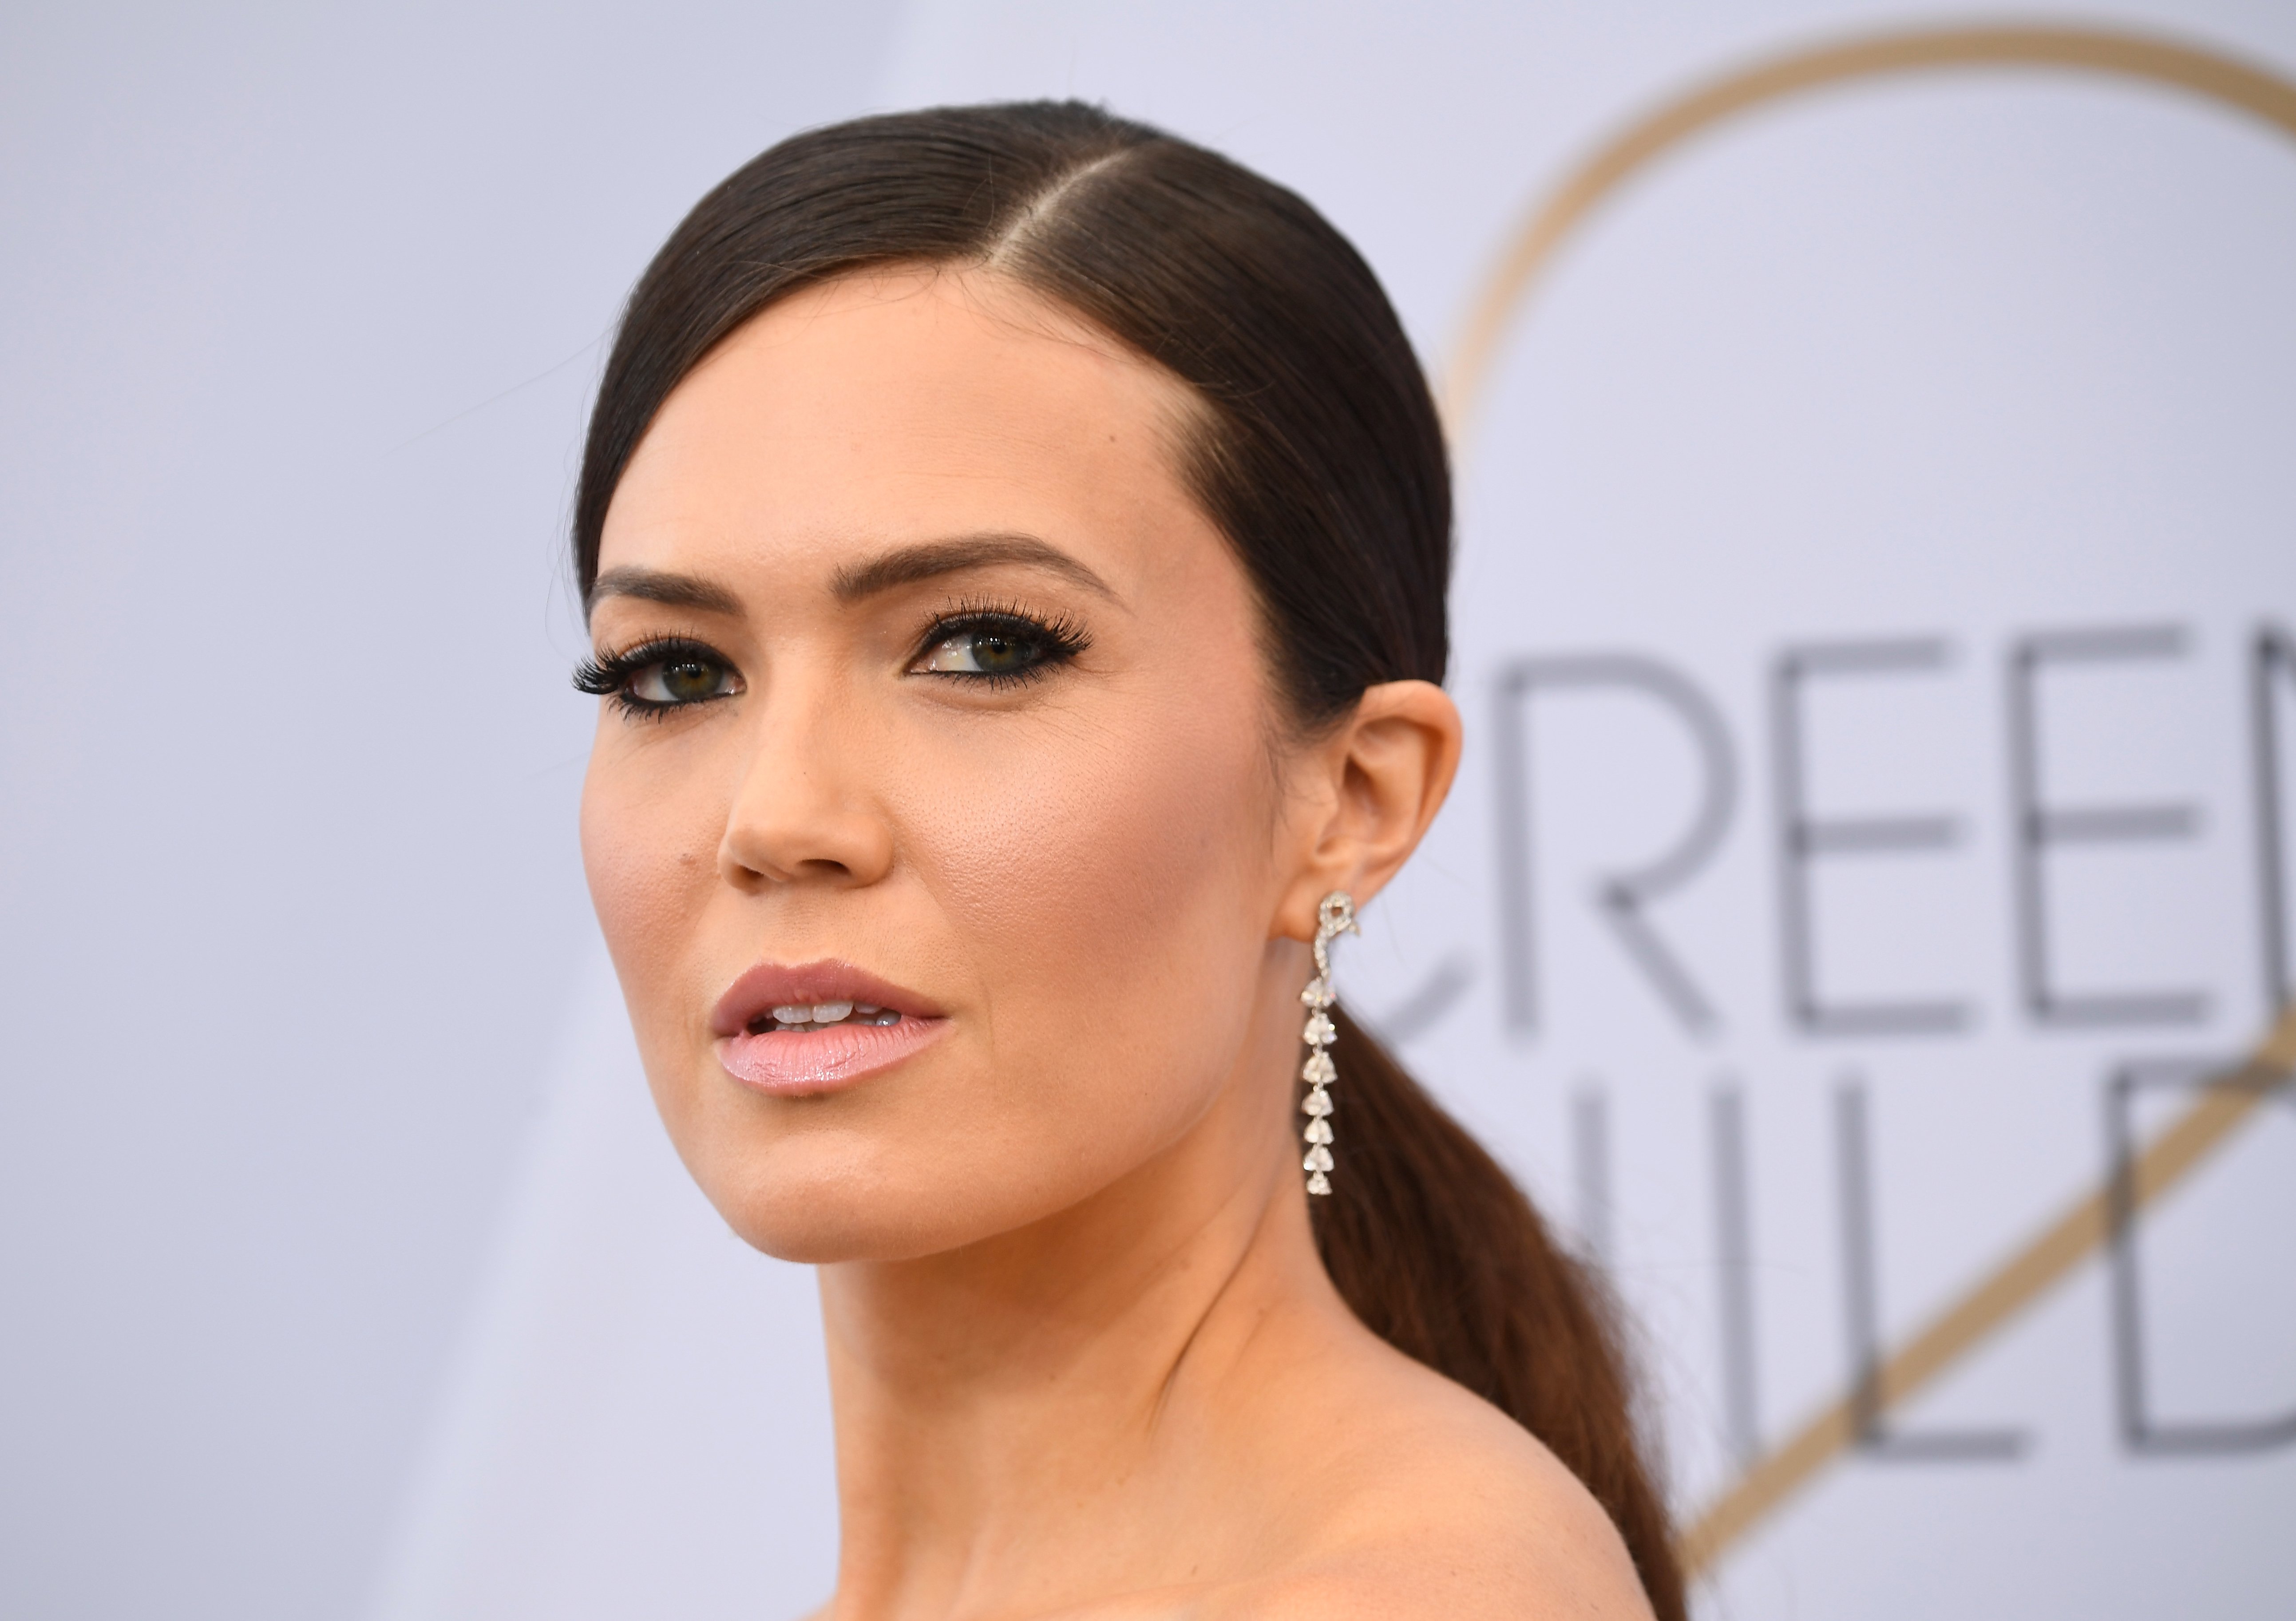 Mandy Moore attends the 25th Annual Screen Actors Guild Awards at The Shrine Auditorium on January 27, 2019 in Los Angeles, California | Photo: GettyImages